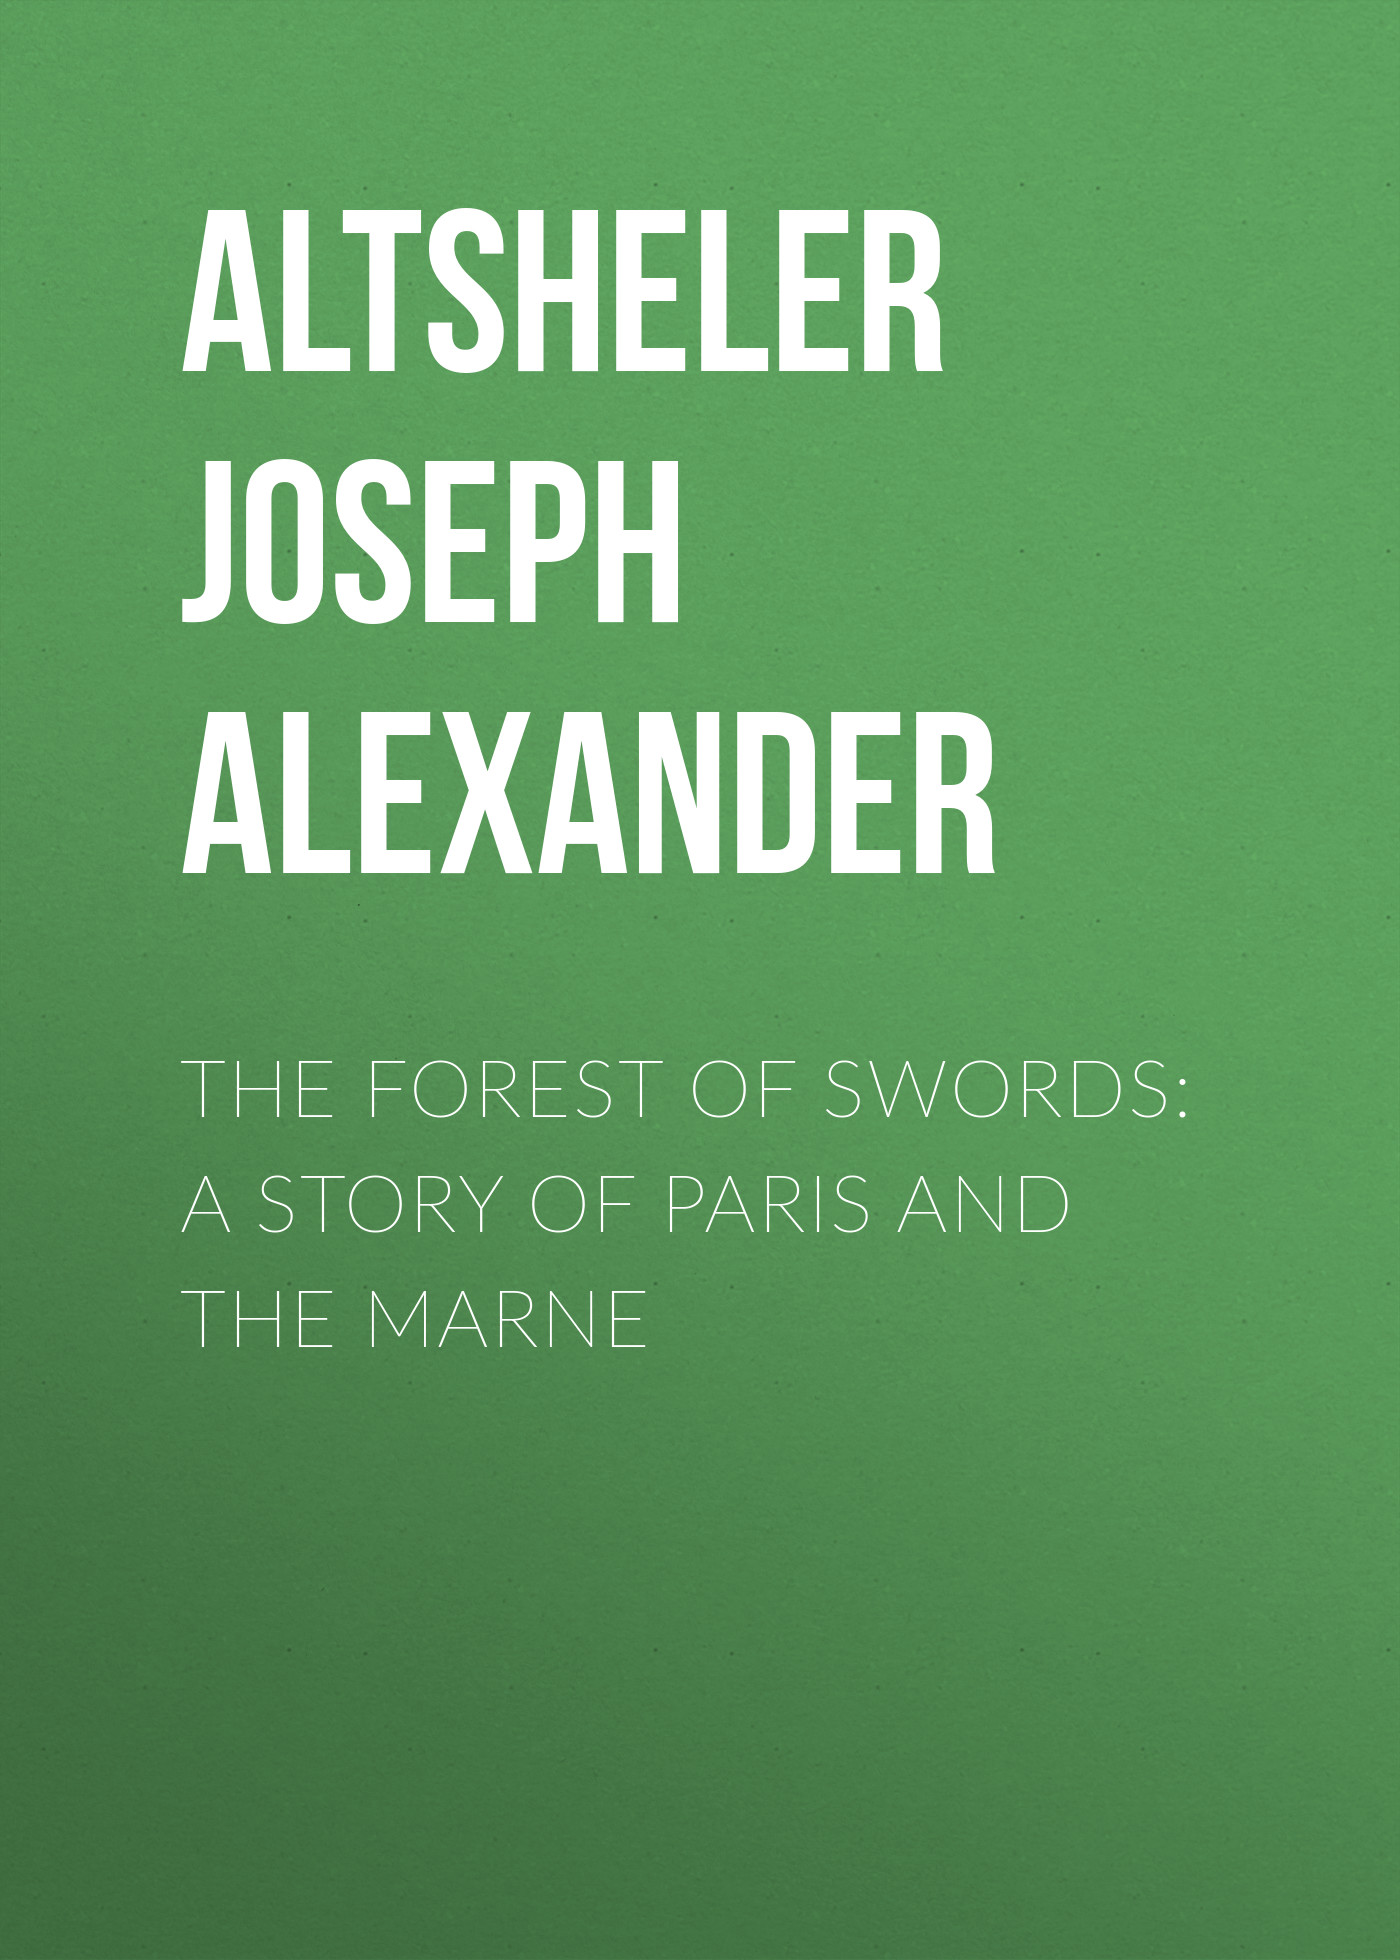 The Forest of Swords: A Story of Paris and the Marne